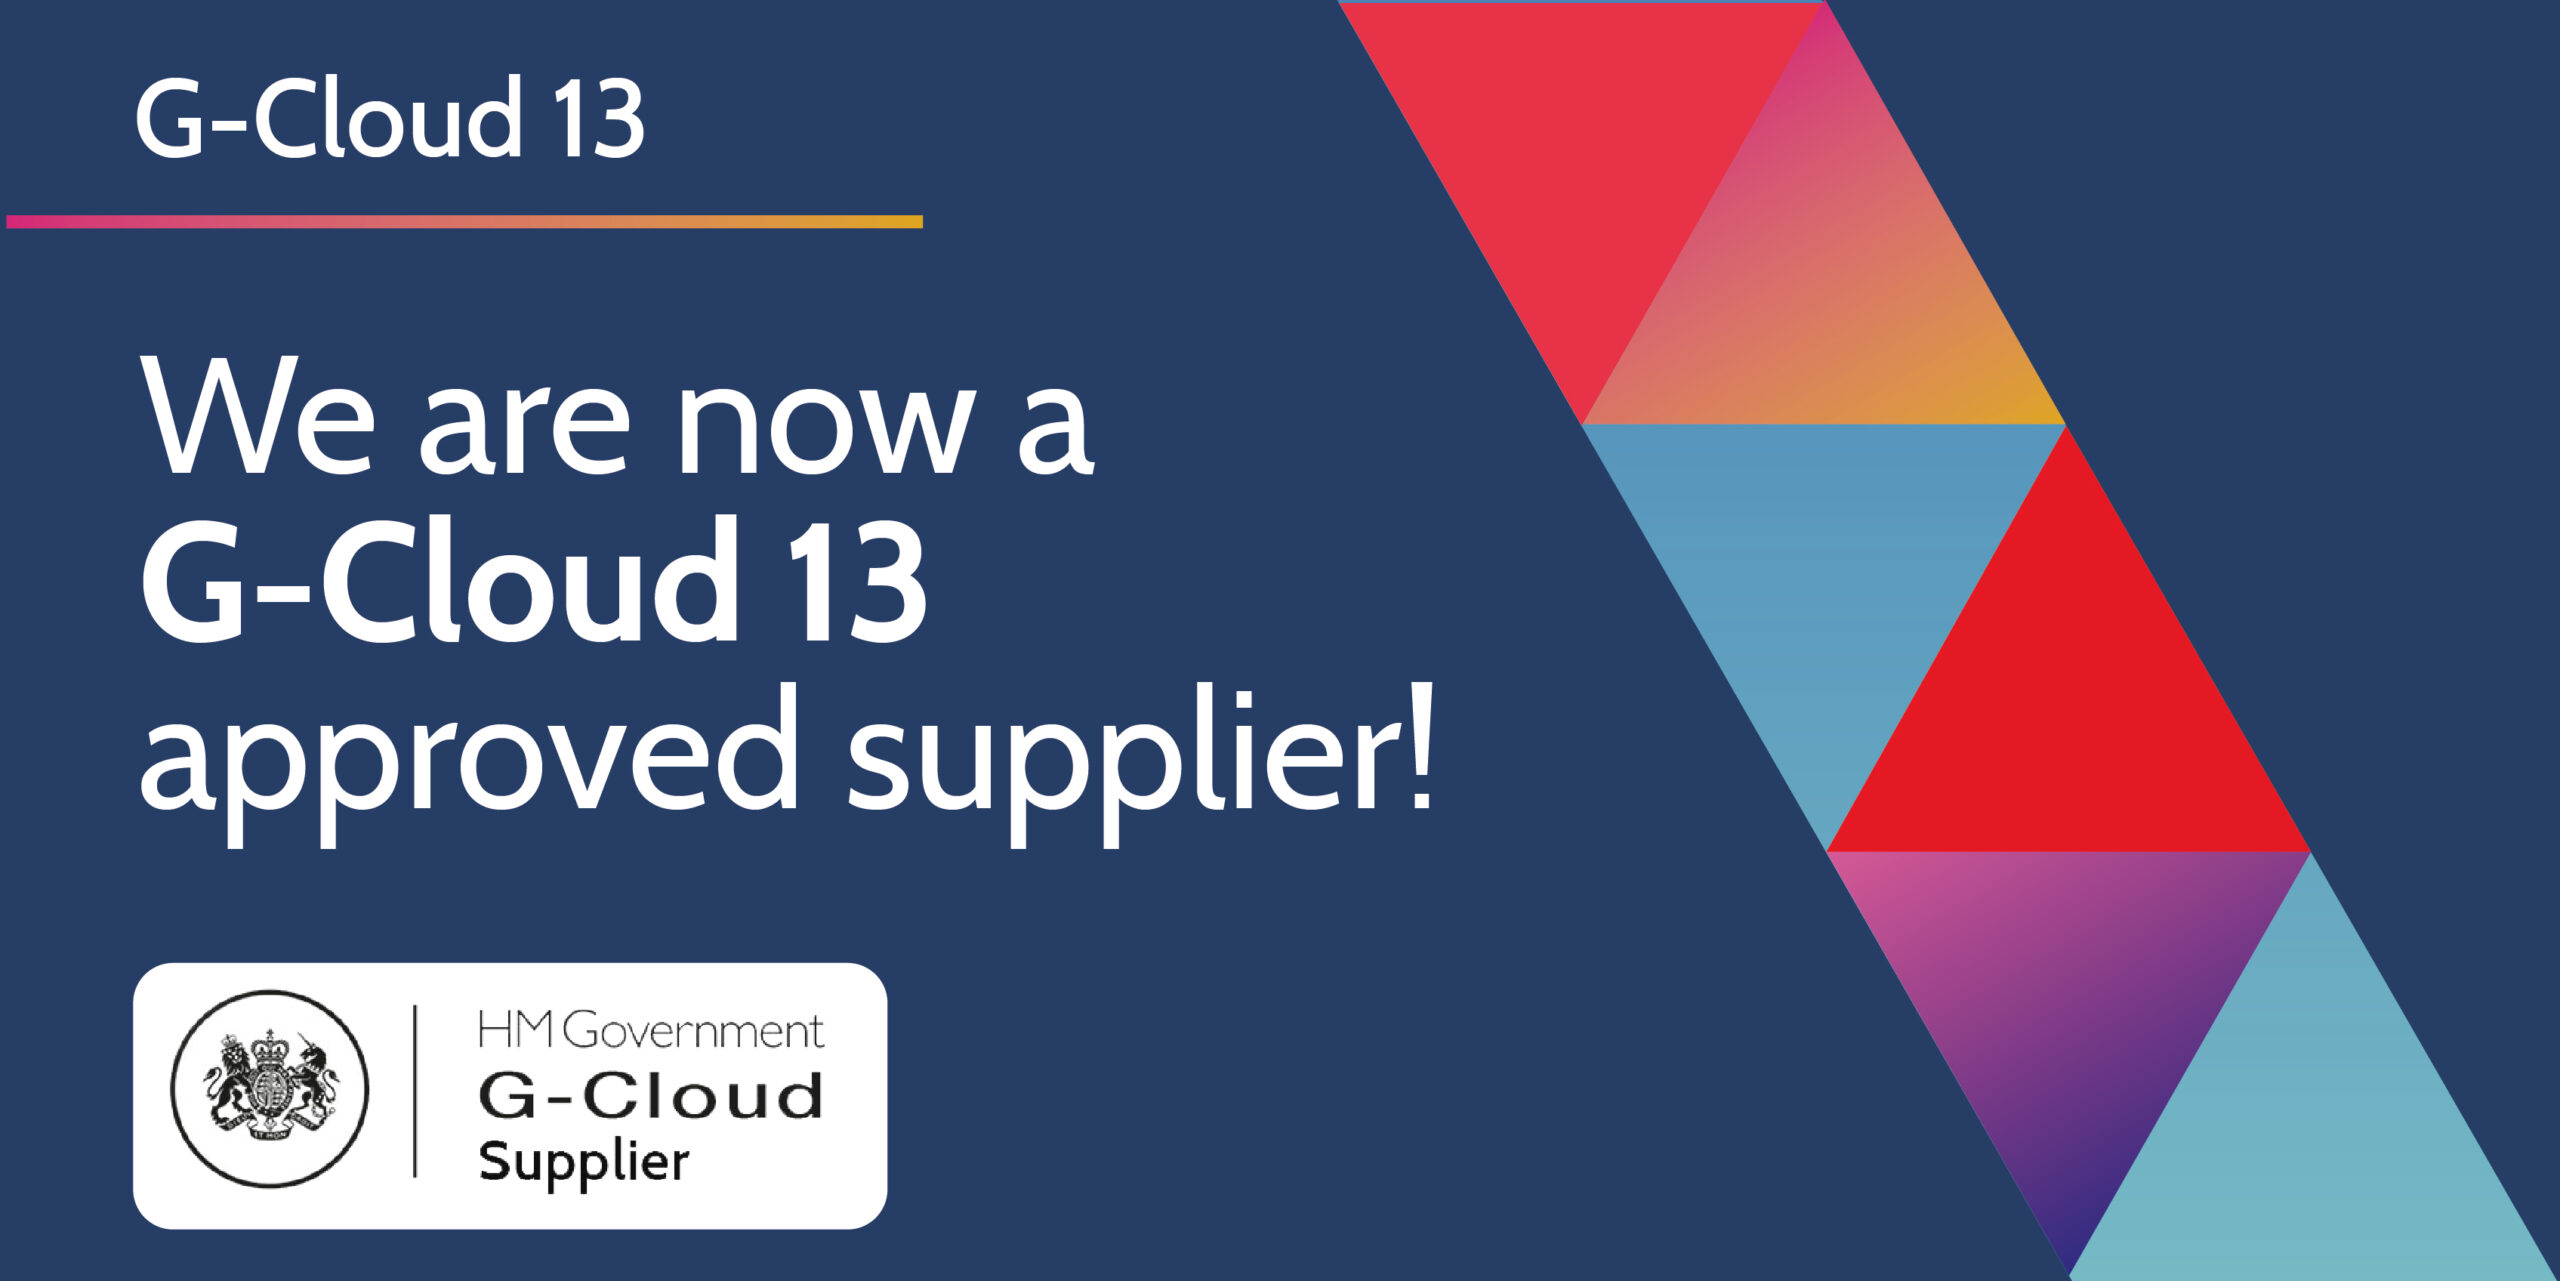 datacentreplus is now a G cloud 13 approved supplier